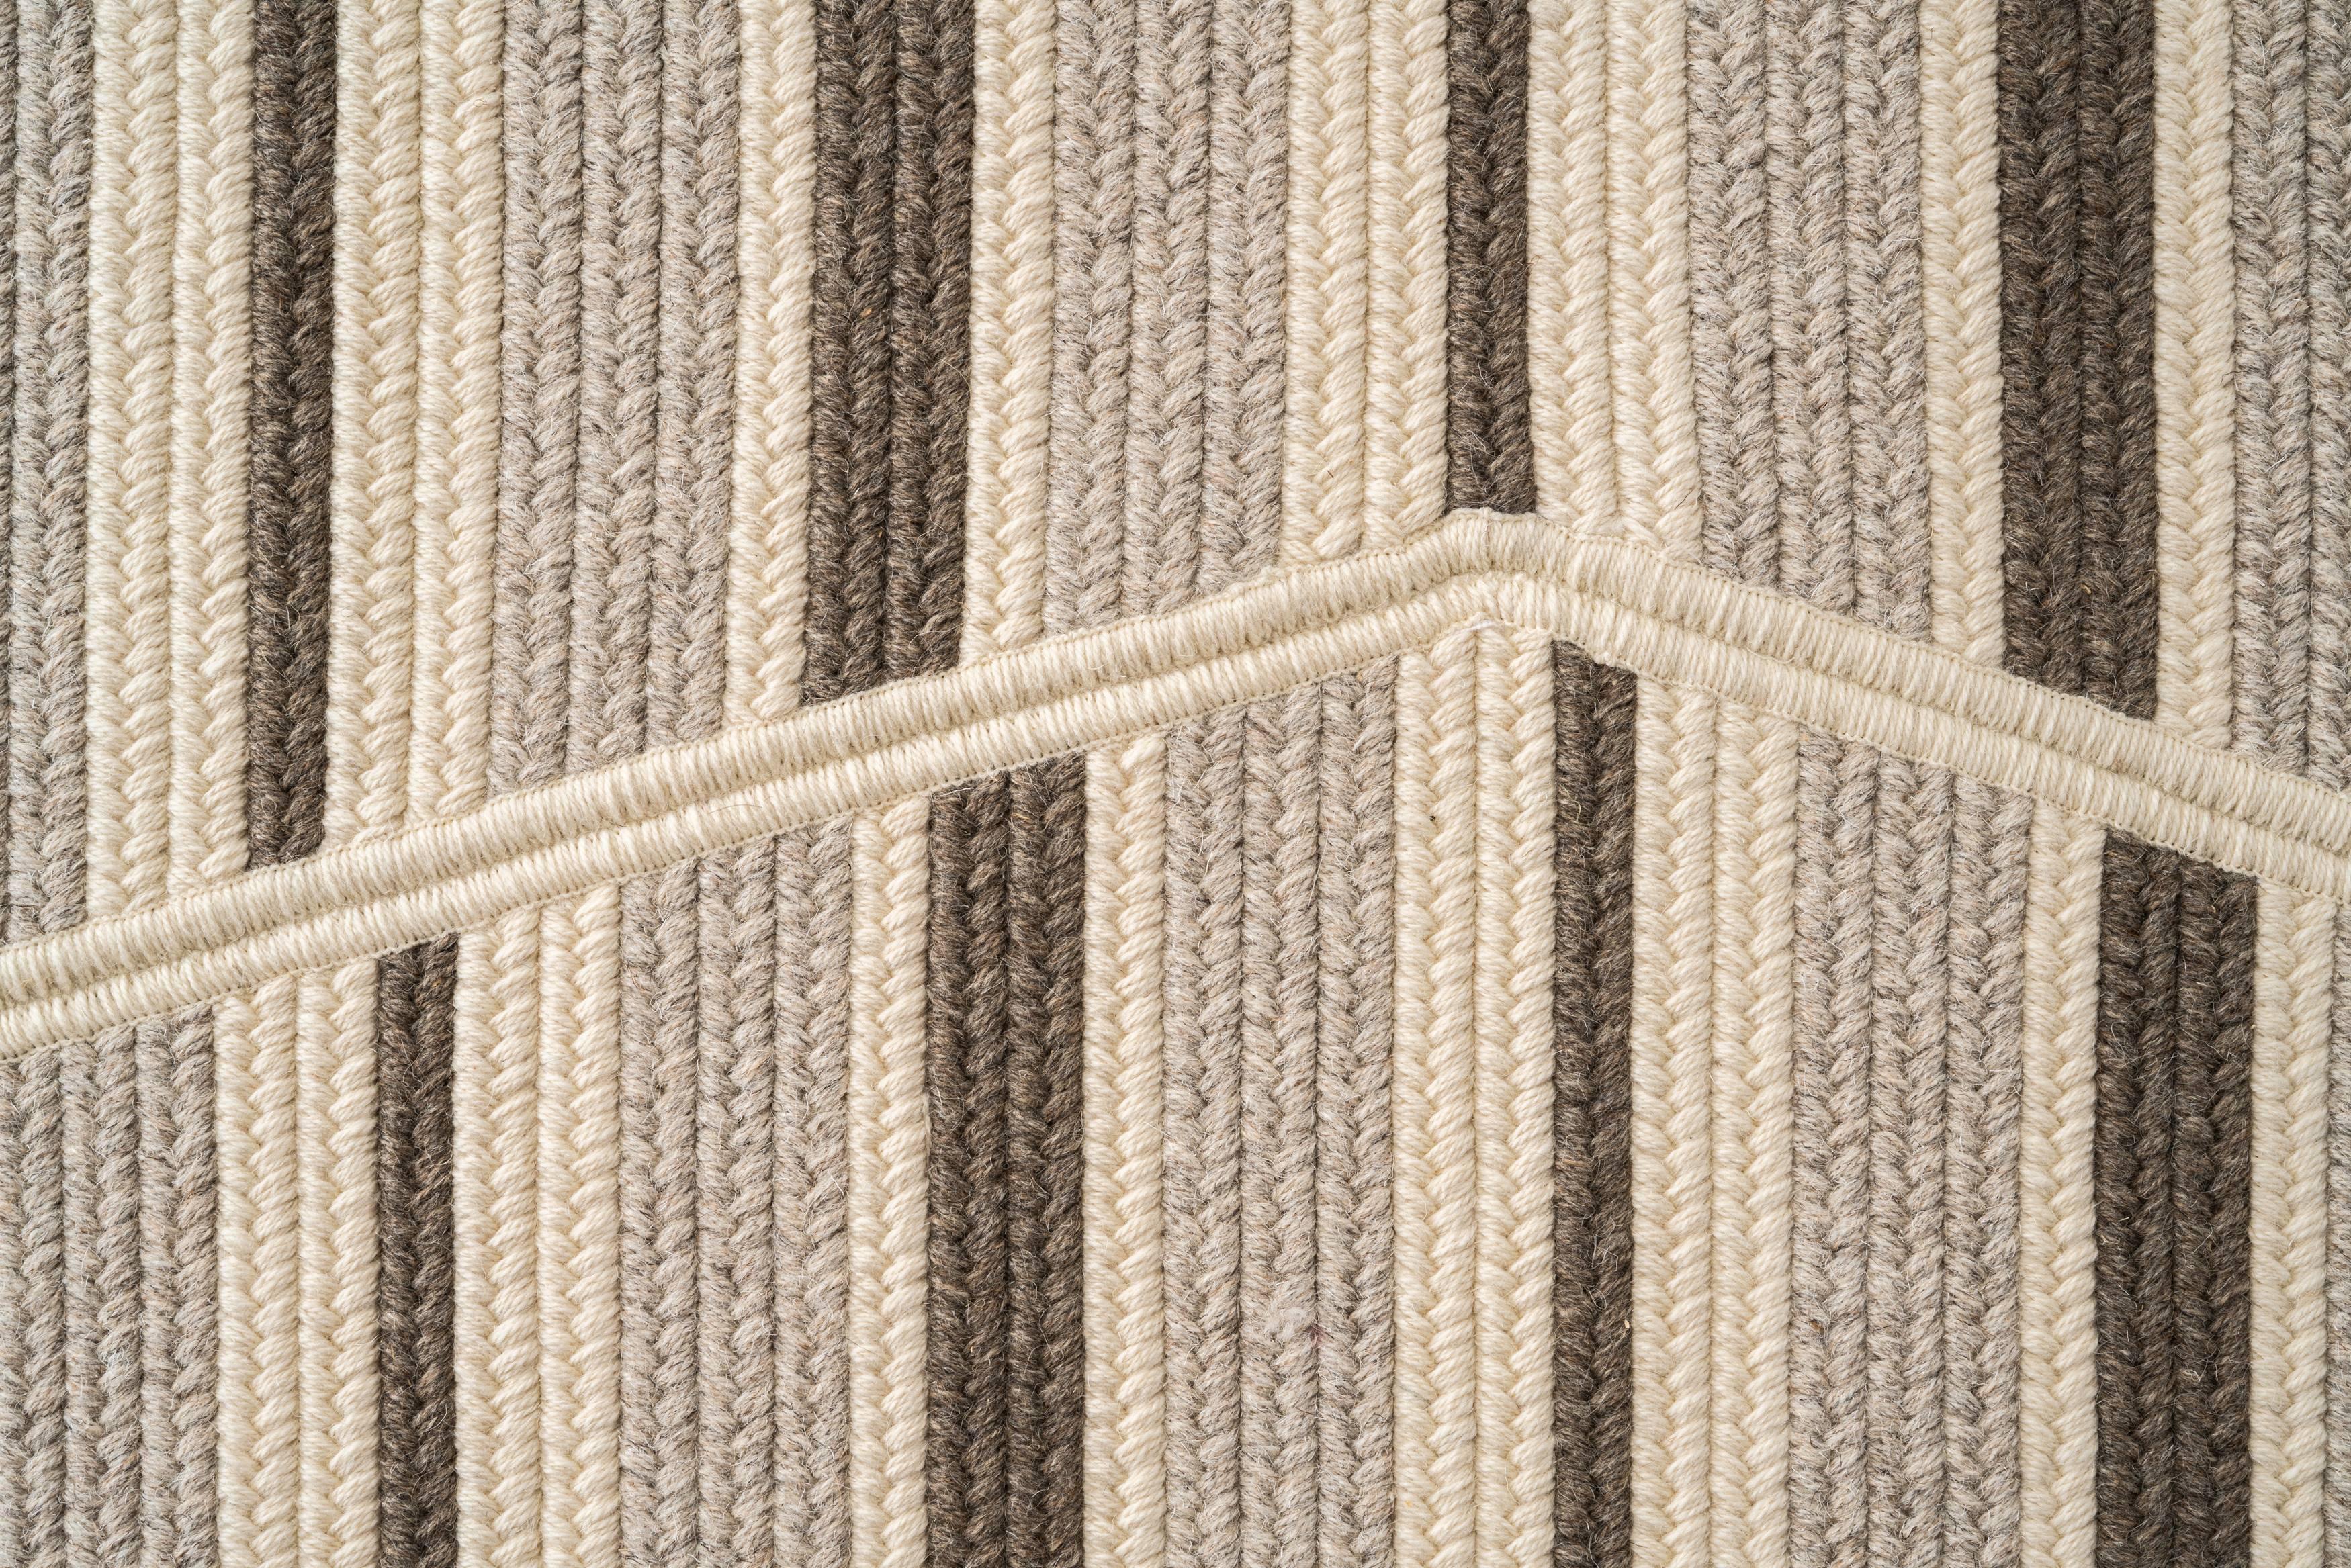 Sands natural wool 8'x10' rectangle reversible rug. Cream, light and dark grey yarns of natural un-dyed wool create stripes of flat woven braid that are broken up by shape and line.  Designed in the Thayer Design Studio (Best of Houzz Design 2018),